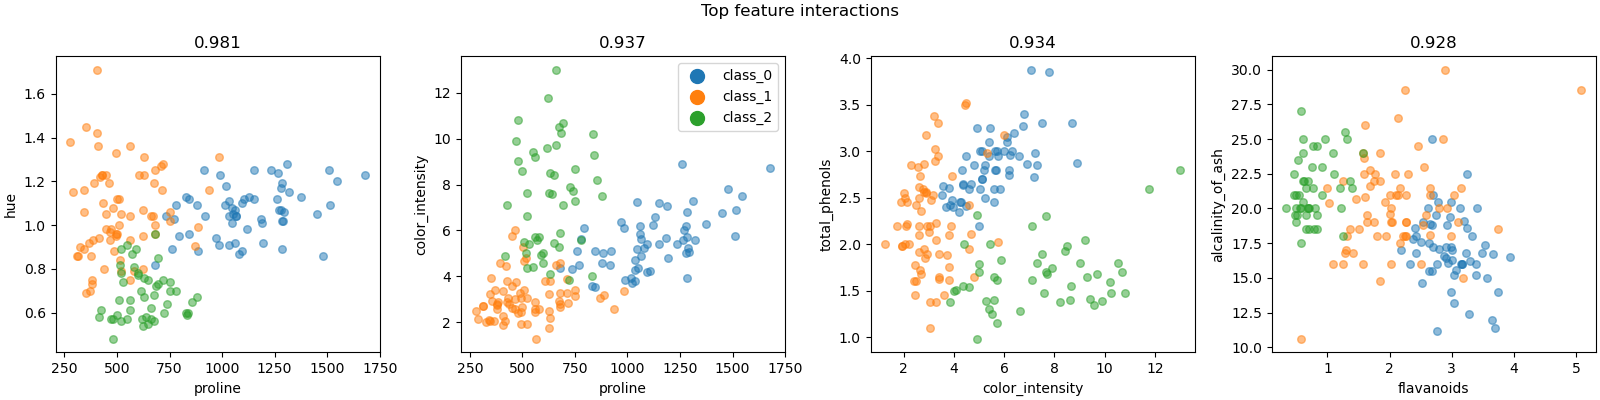 Top feature interactions, 0.981, 0.937, 0.934, 0.928